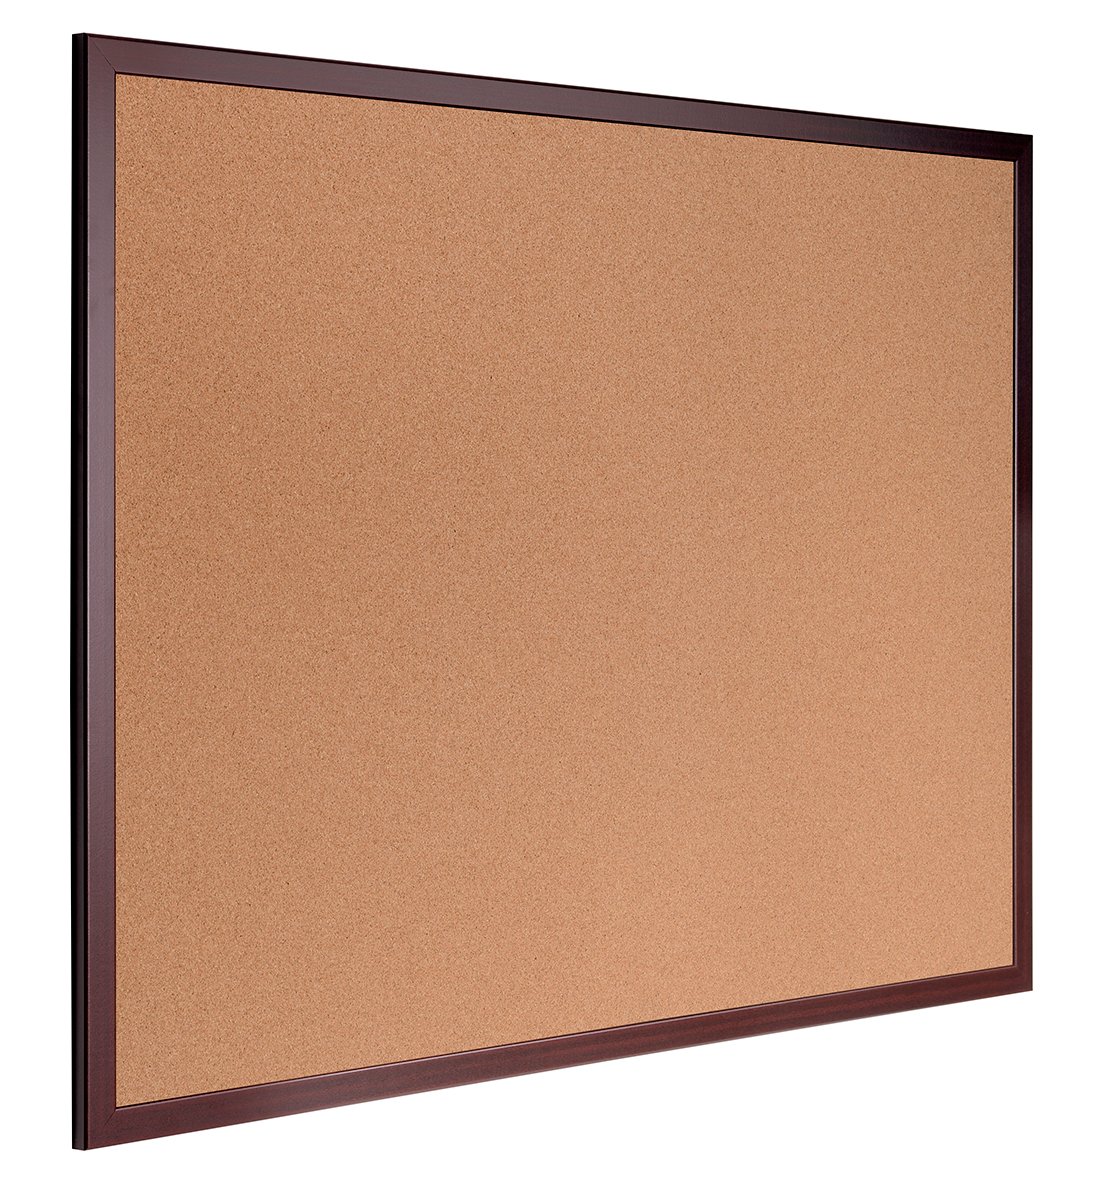 Bi-Silque SF132001659 Earth-It Cork Board with Executive Board under environmentally friendly and Natural cork layer 900x600 mm